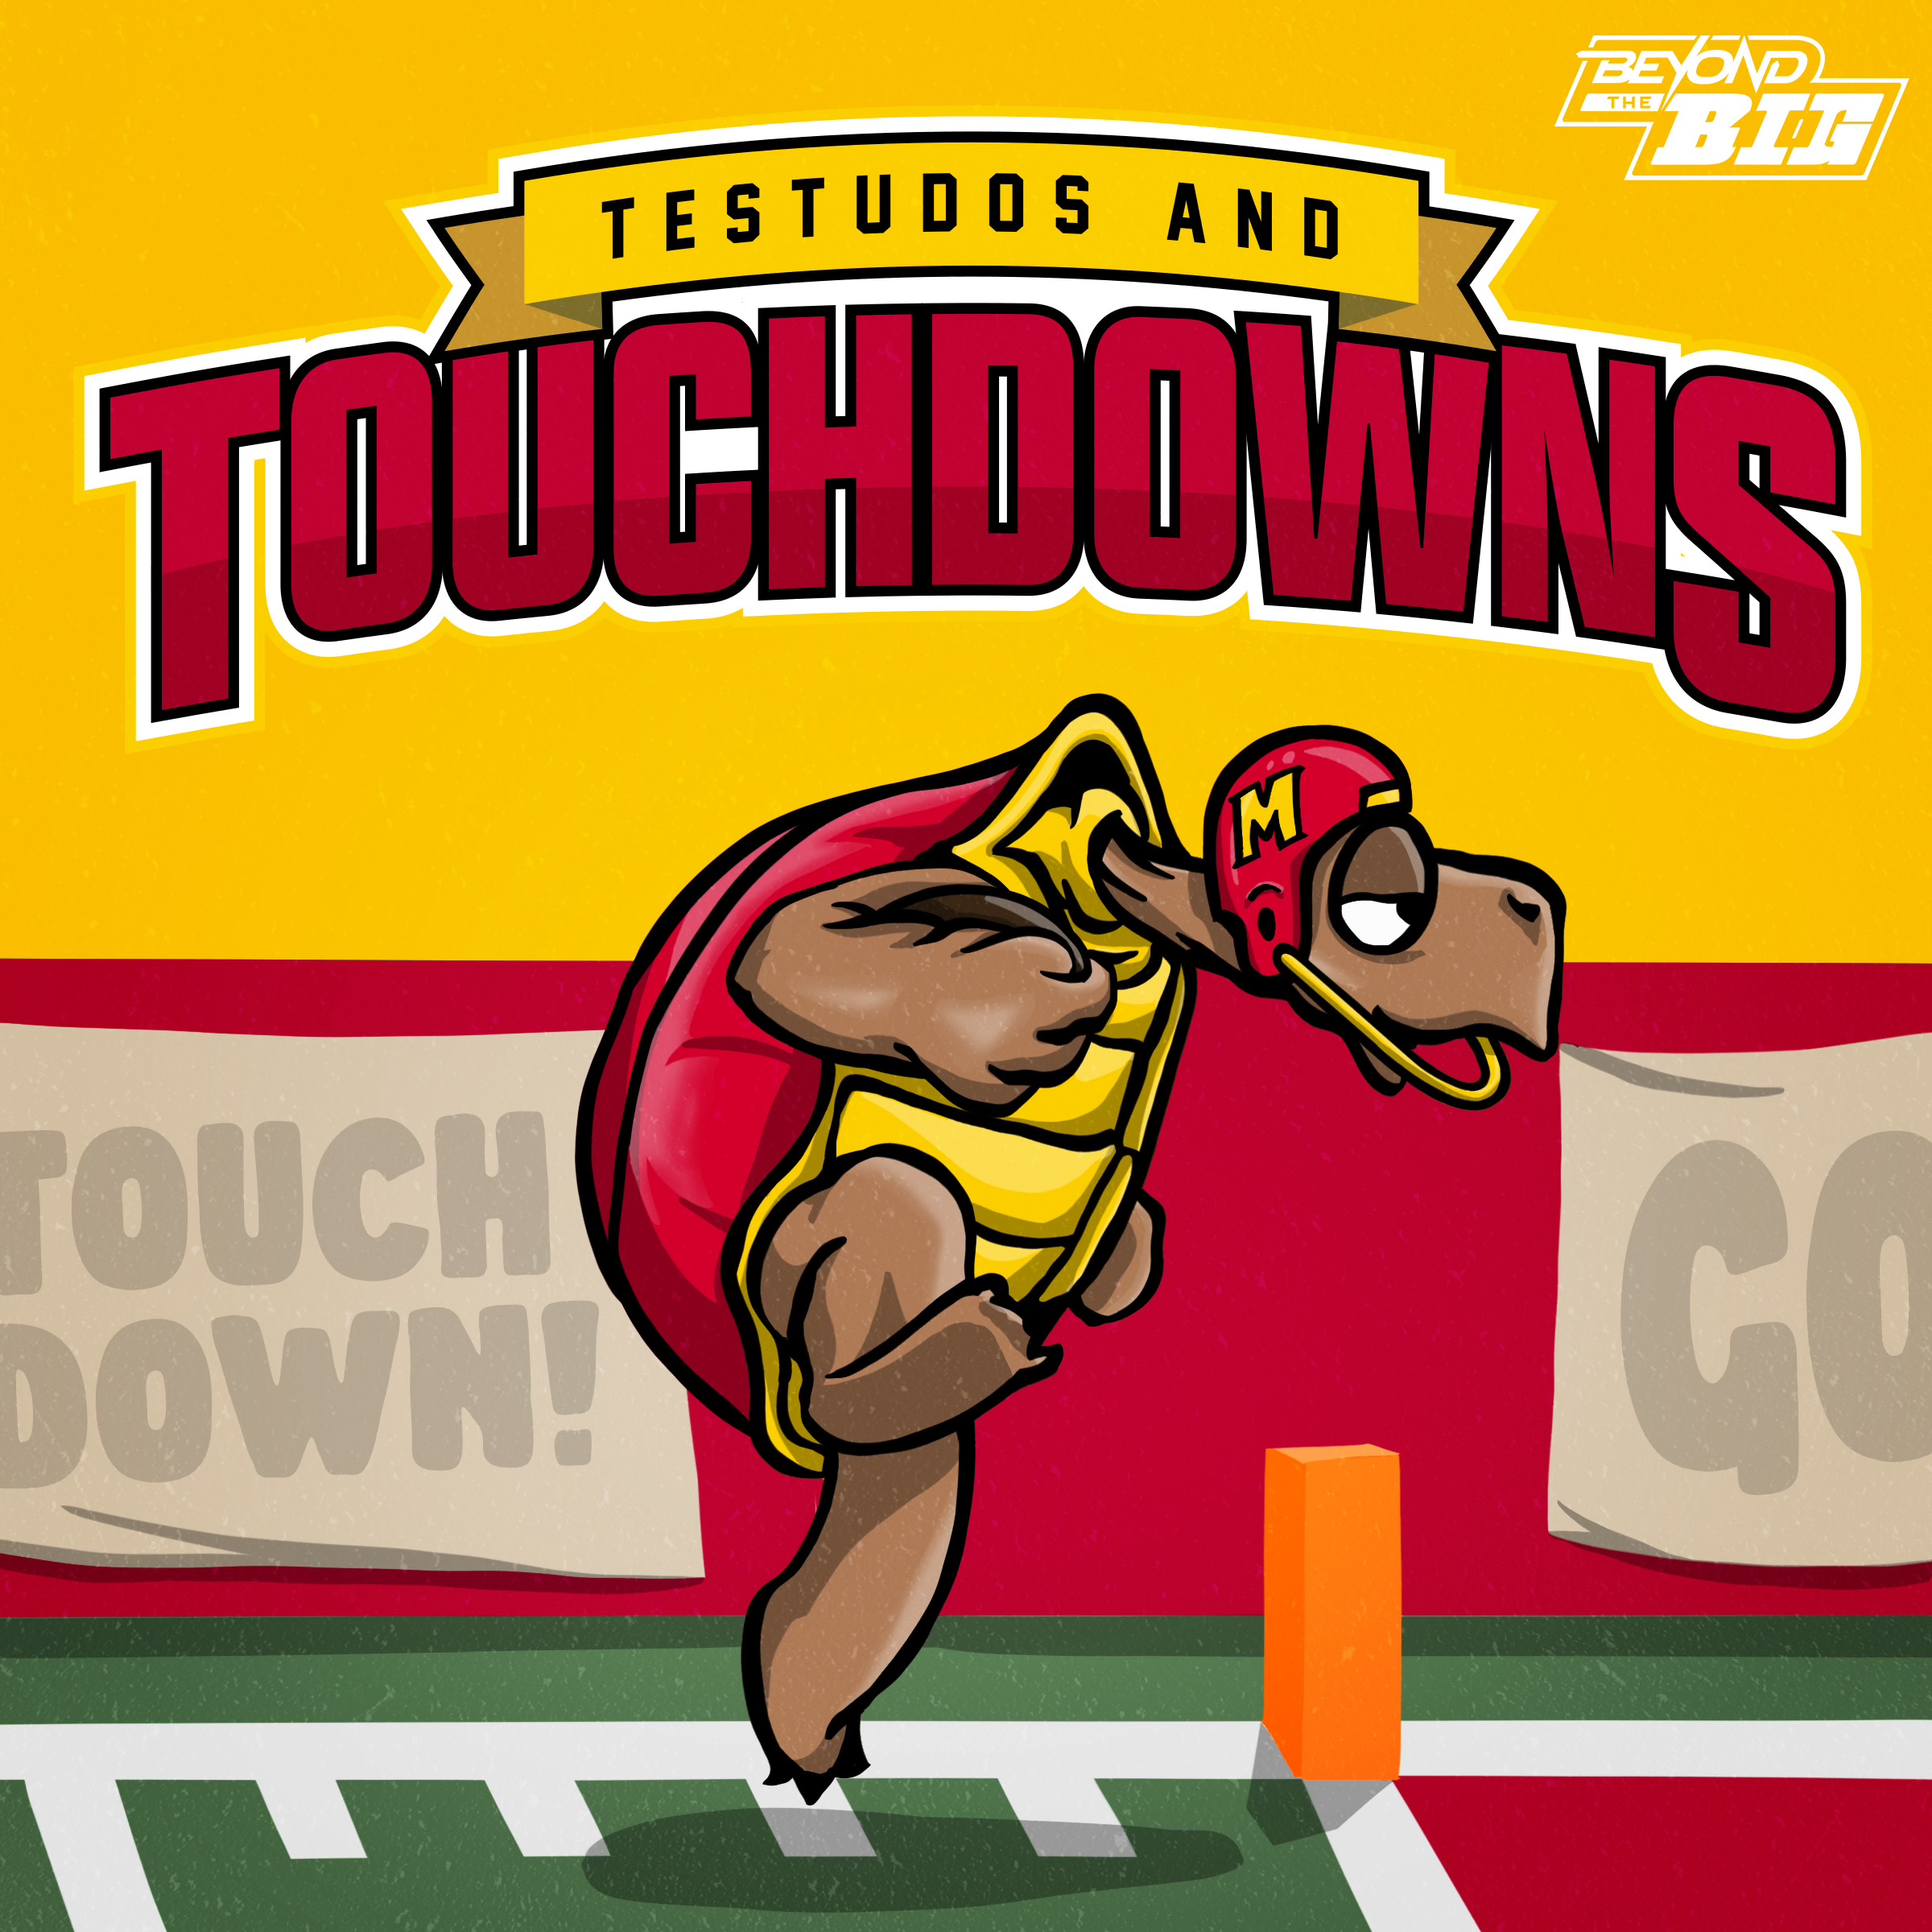 Artwork for Maryland Testudos & Touchdowns